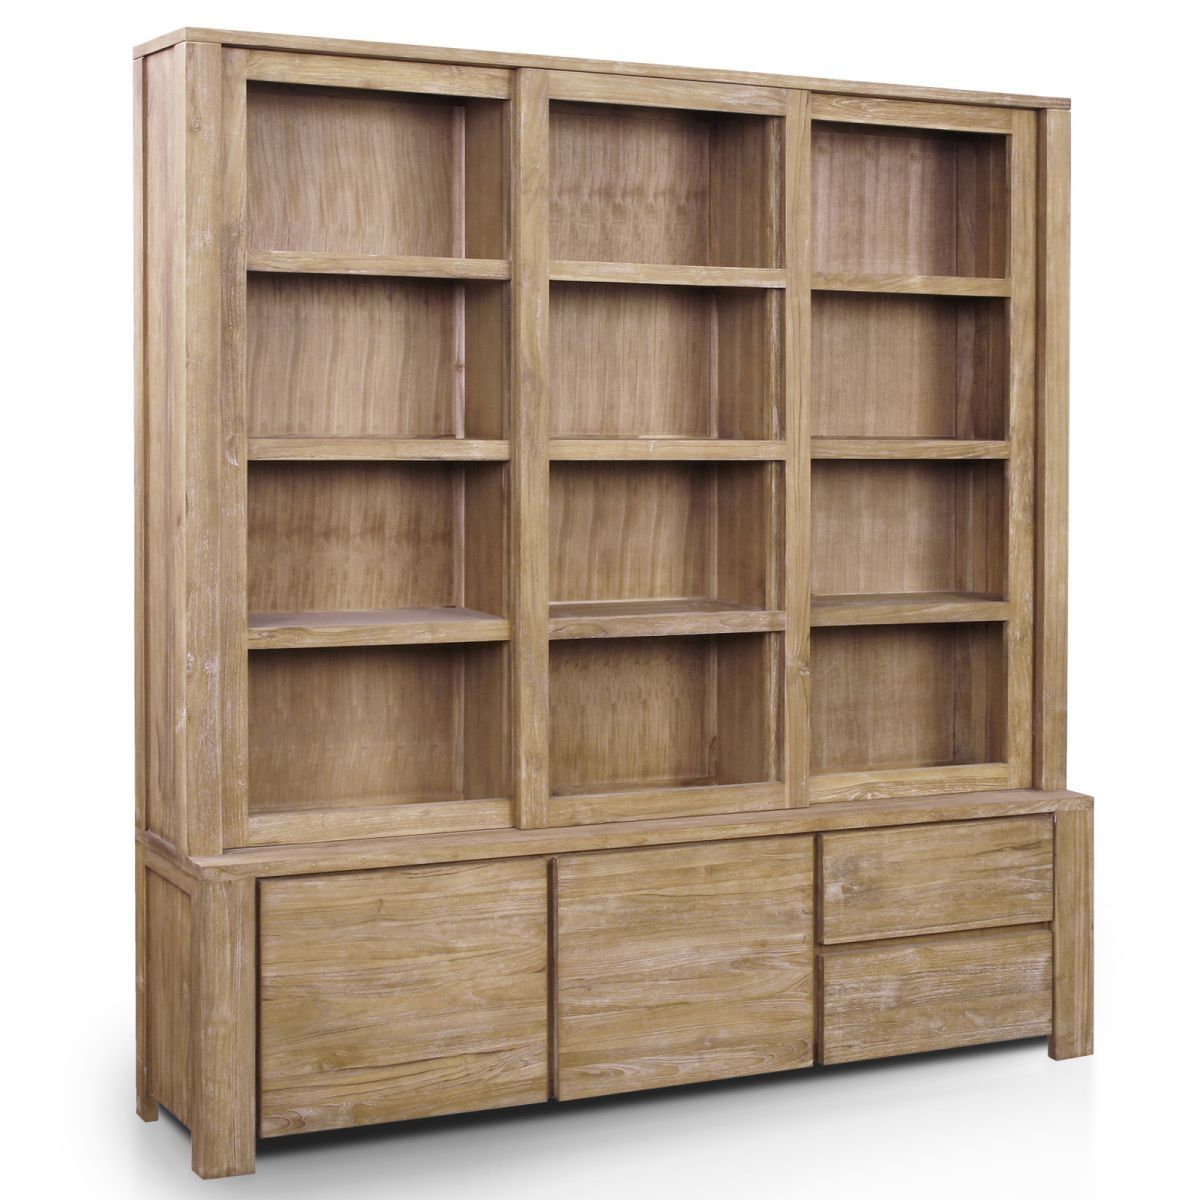 Bookcase With Doors Living Room Ideas Bookcase With Doors Bookcase With Regard To Bookcase With Doors (View 12 of 15)